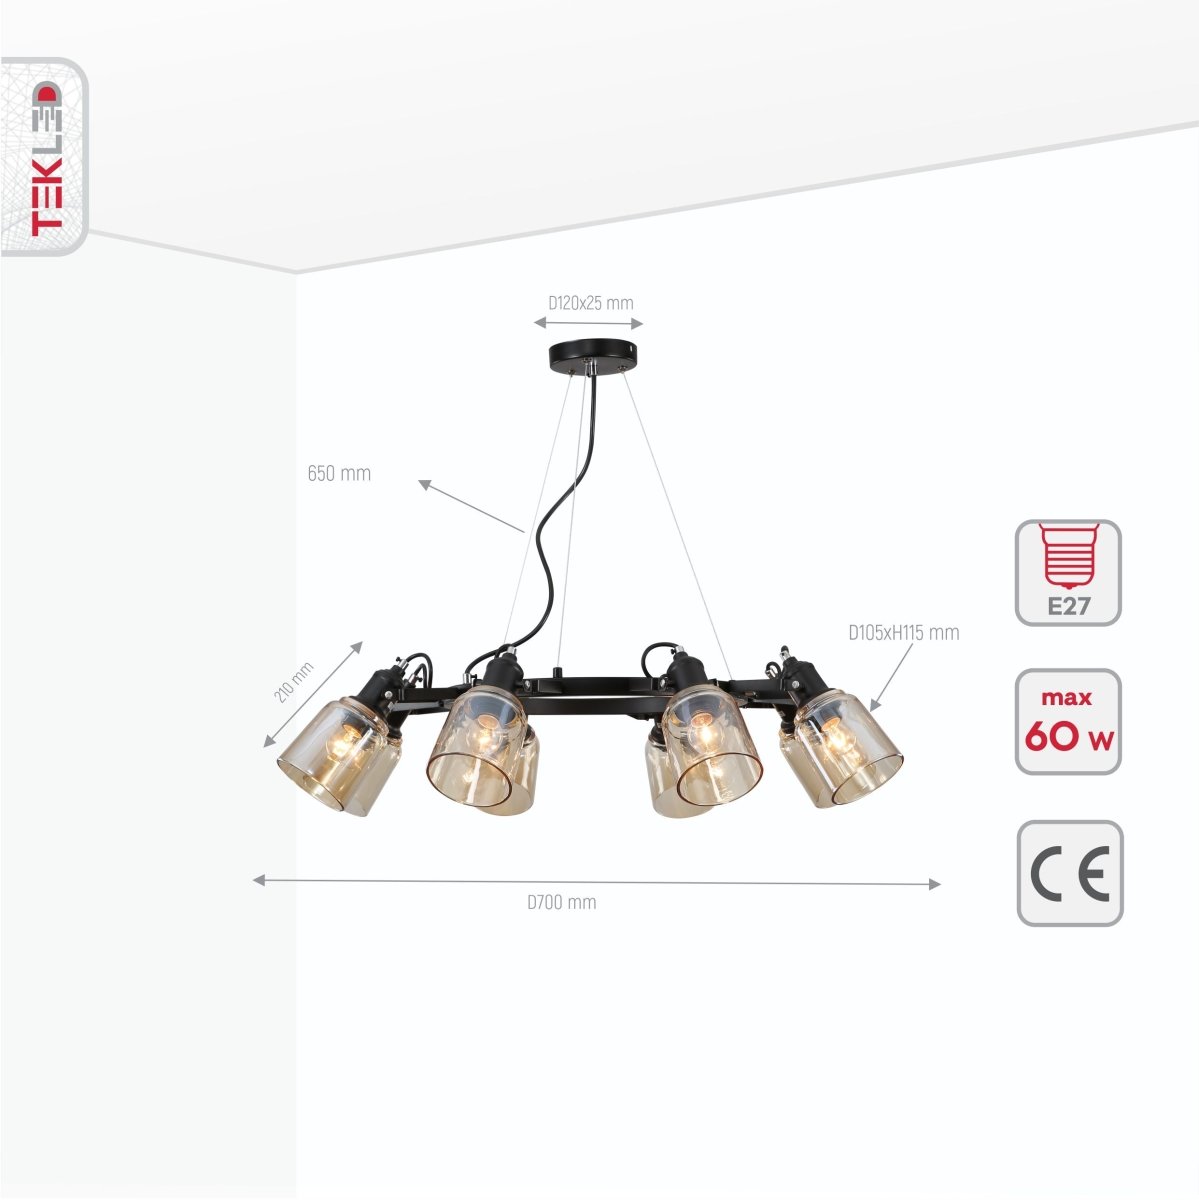 Product dimensions of amber cone glass black suspended ceiling light 8xe27